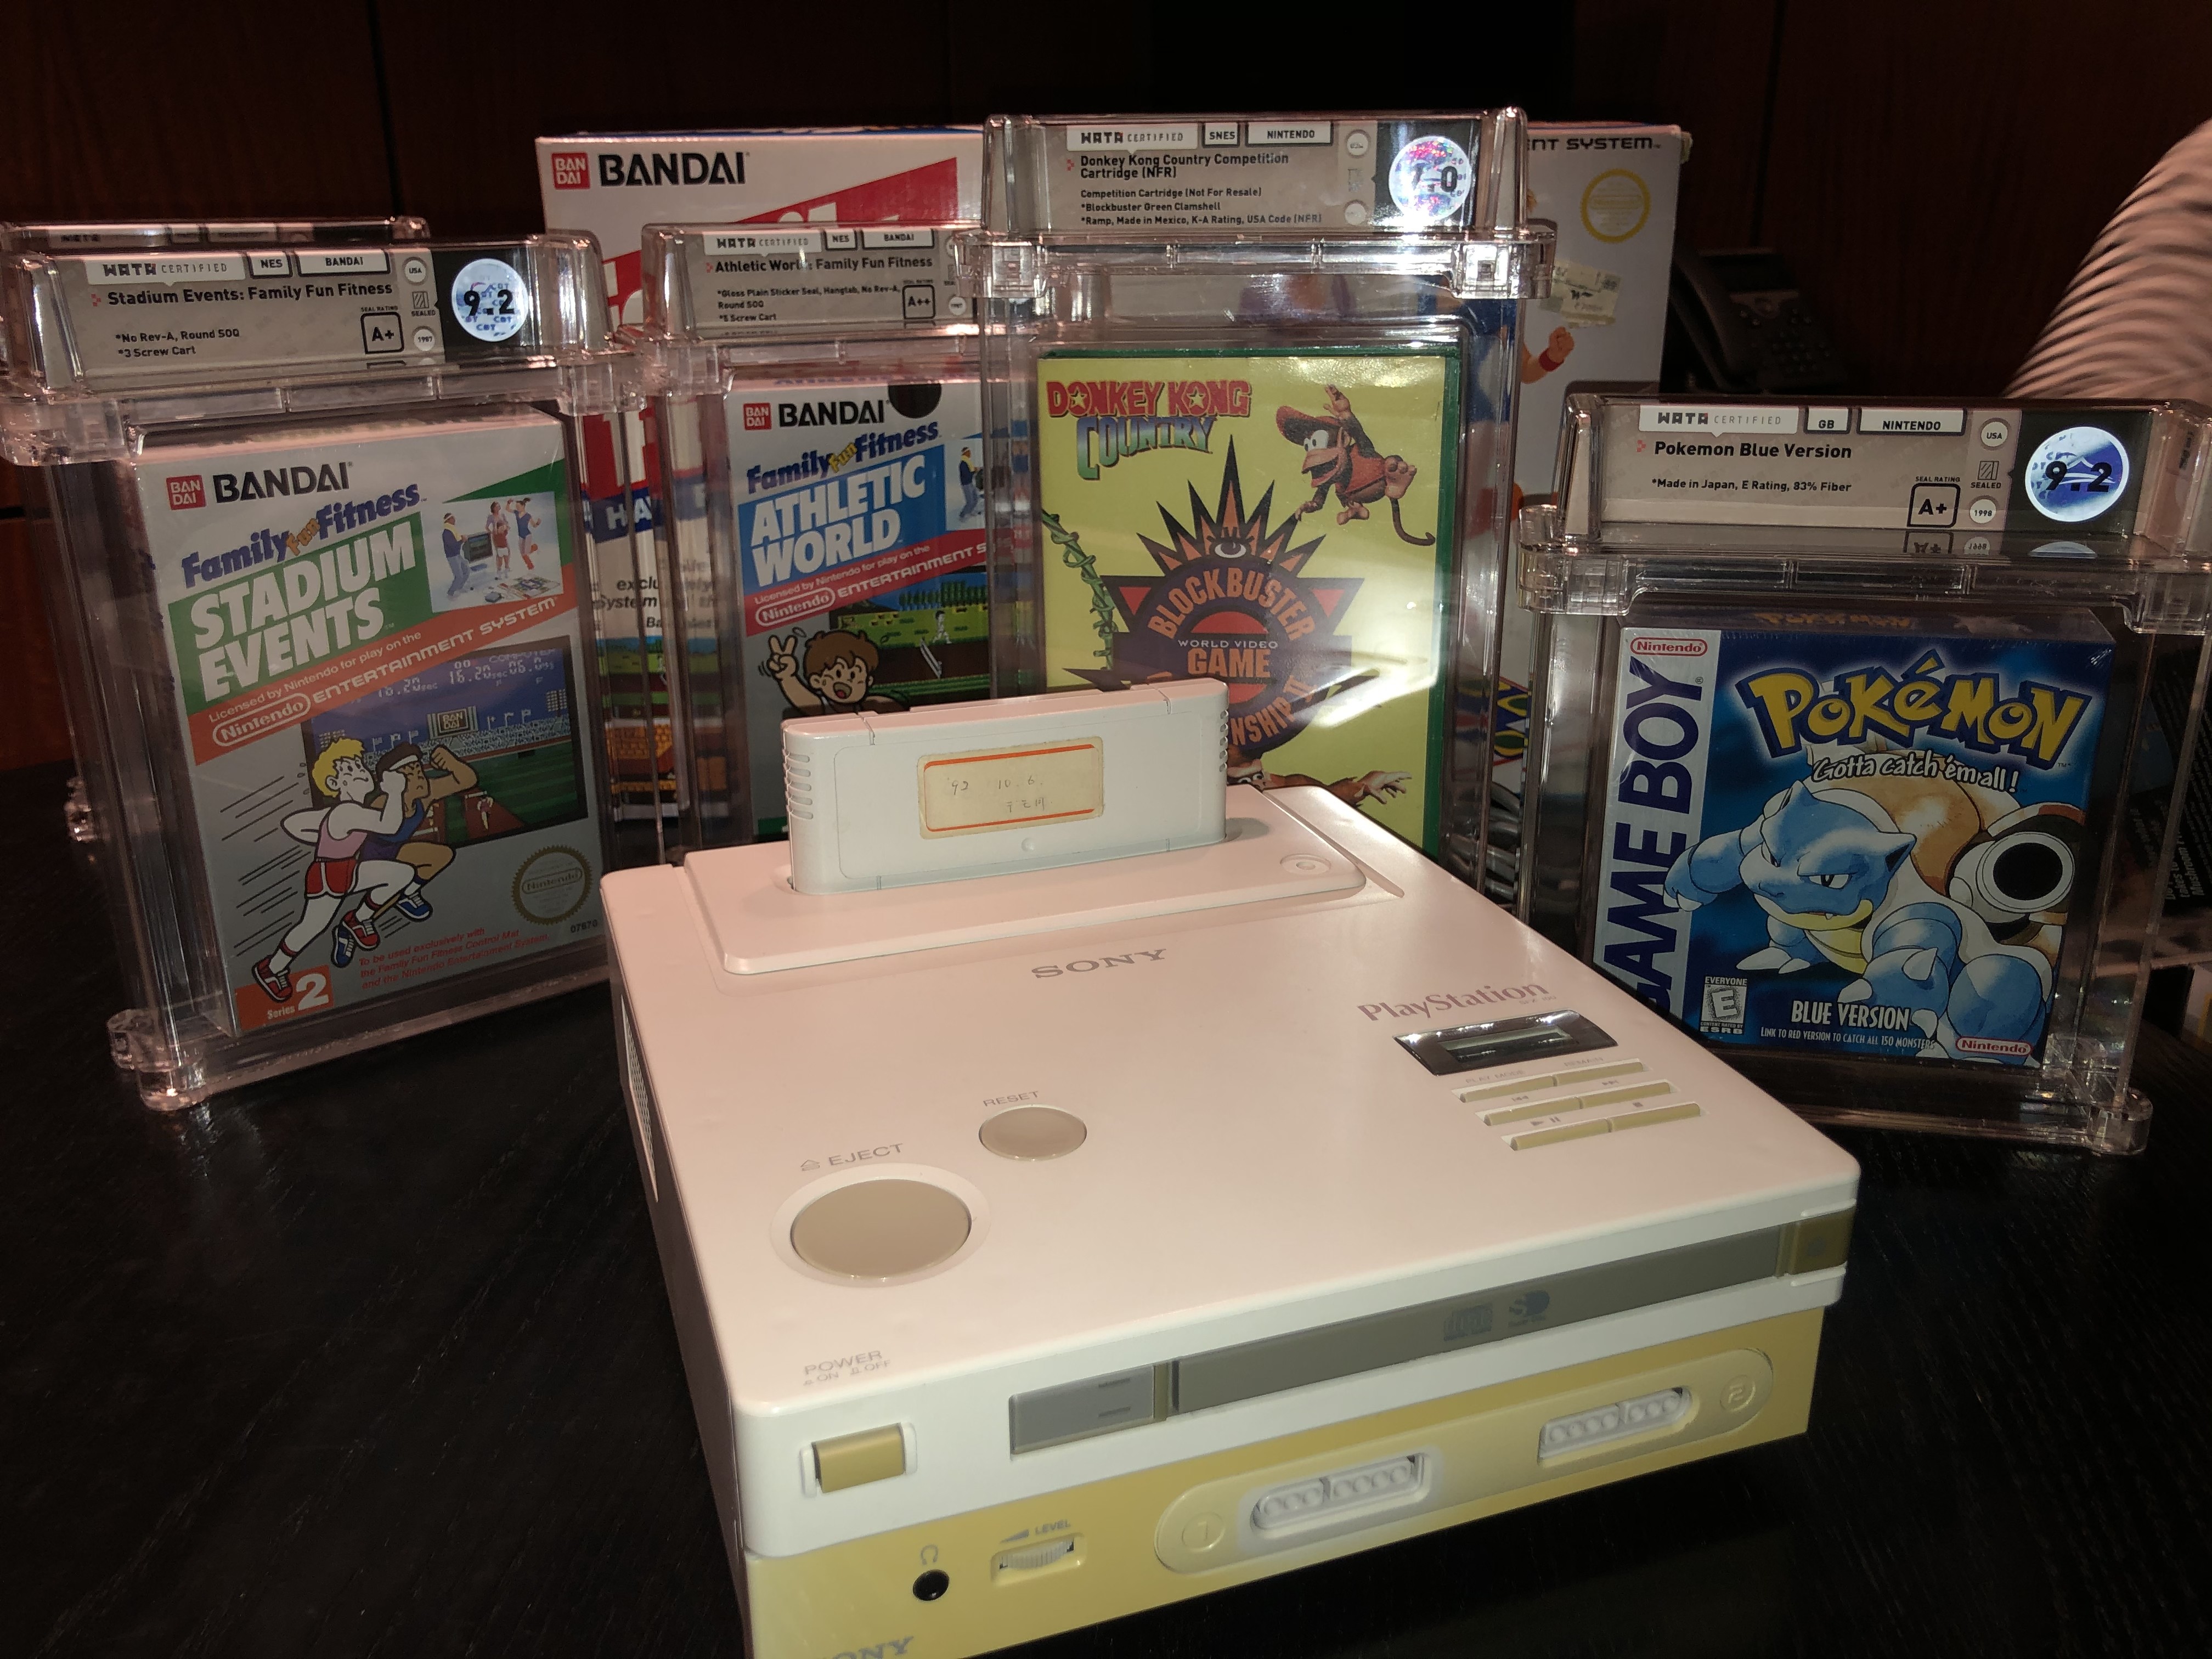 $280,000 Video Game Console: Dallas Auction House Sells Rarest Games | Dallas Observer